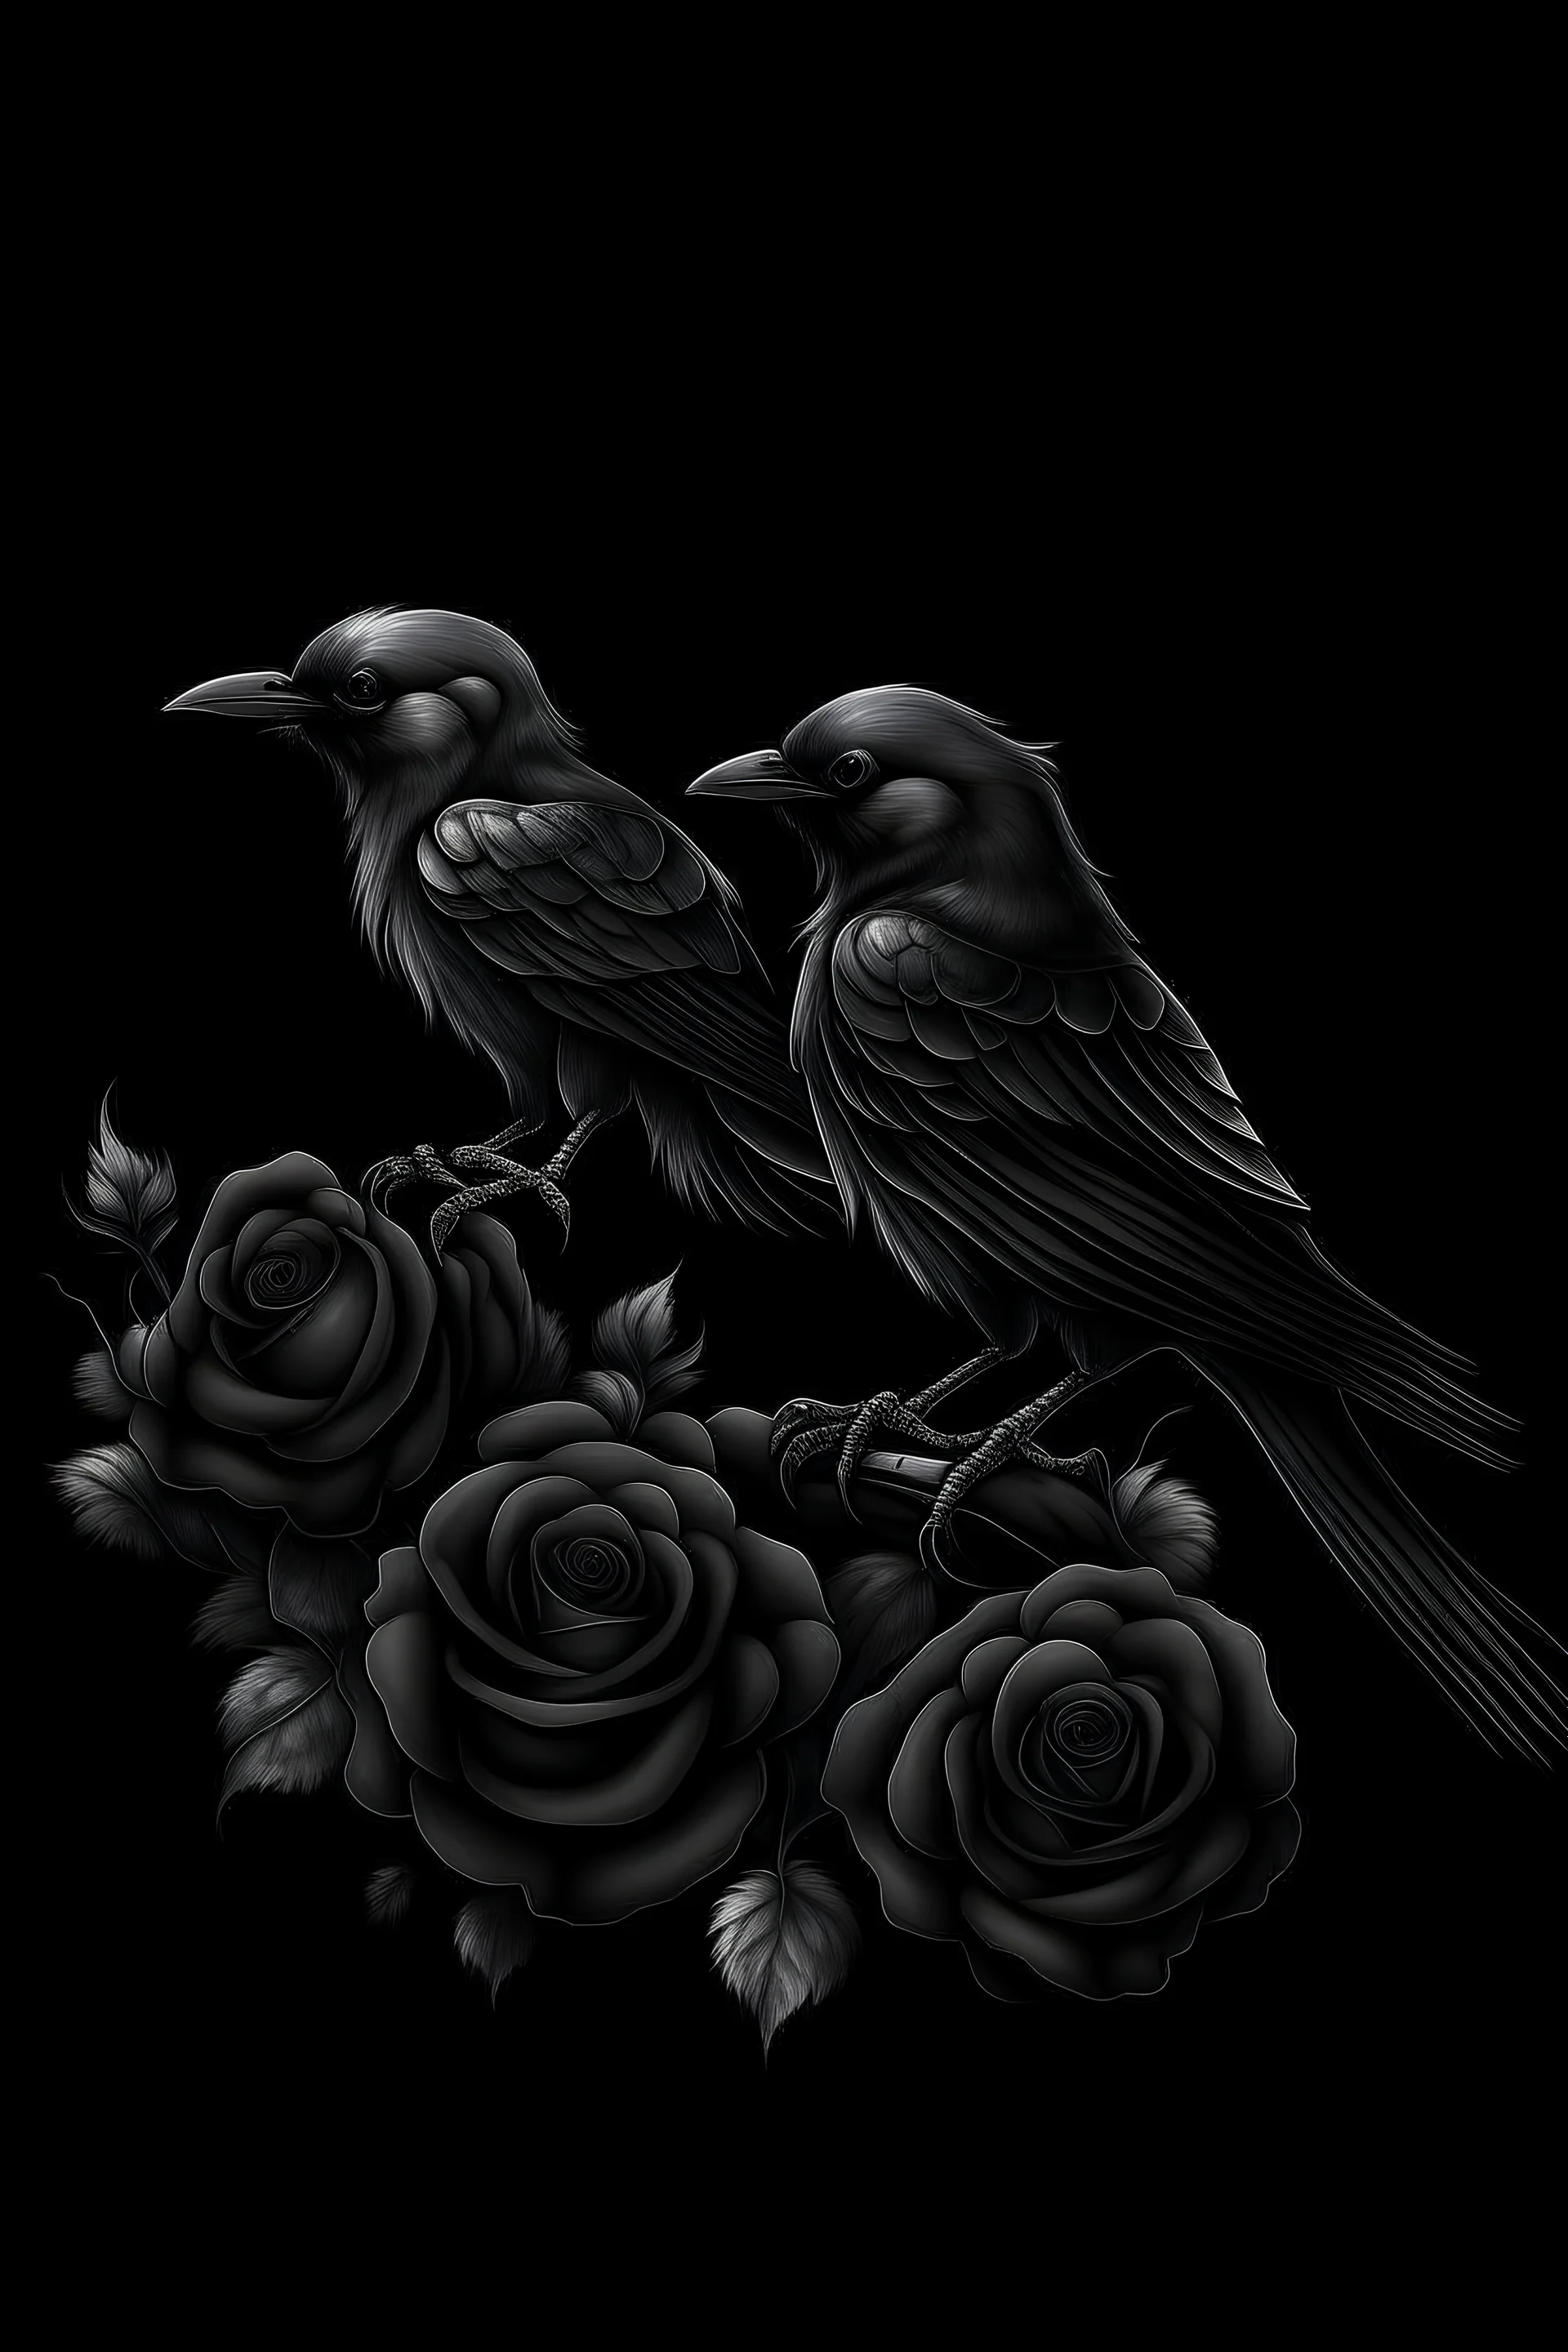 crows and a rose in a black background